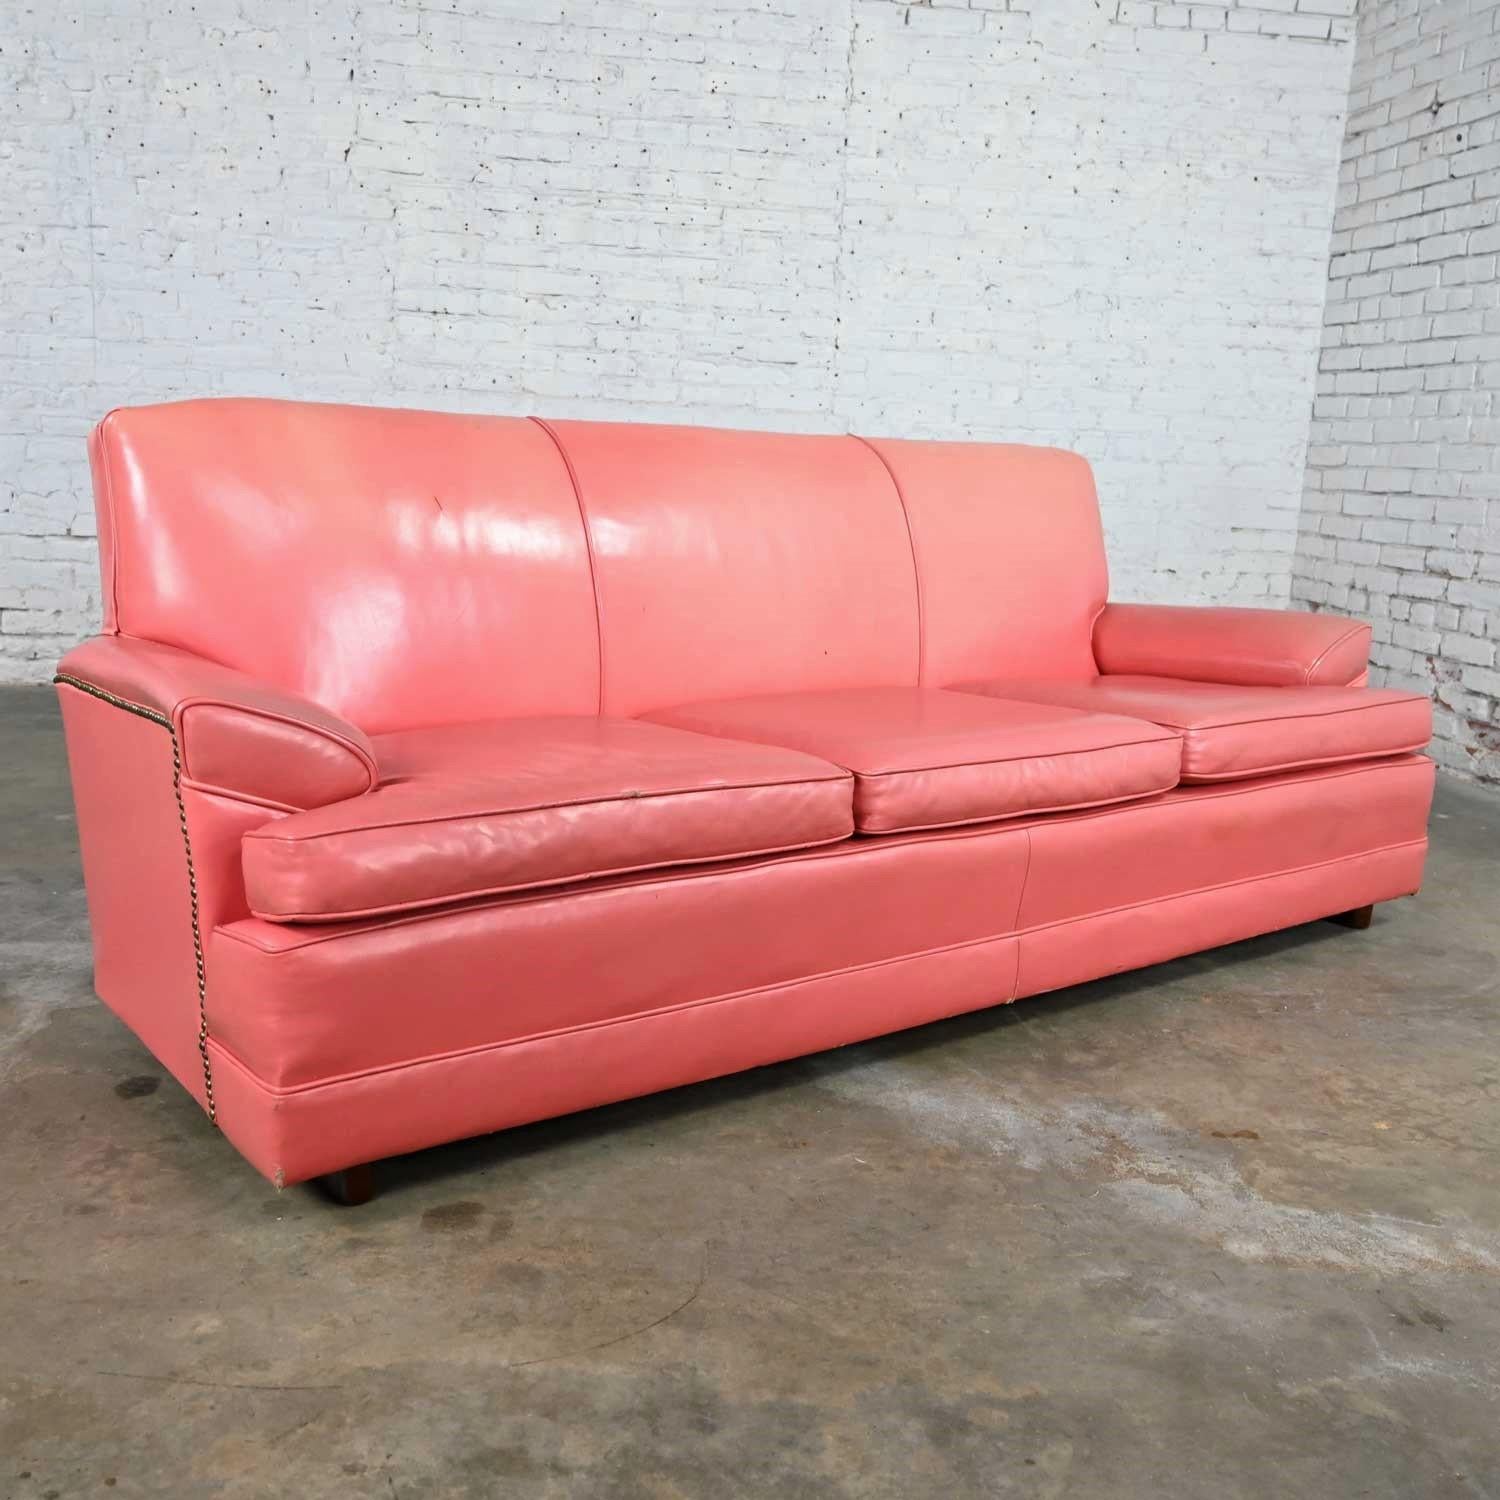 Mid-20th Century Vintage Hollywood Regency Art Deco Sofa with Original Pink Distressed Leather